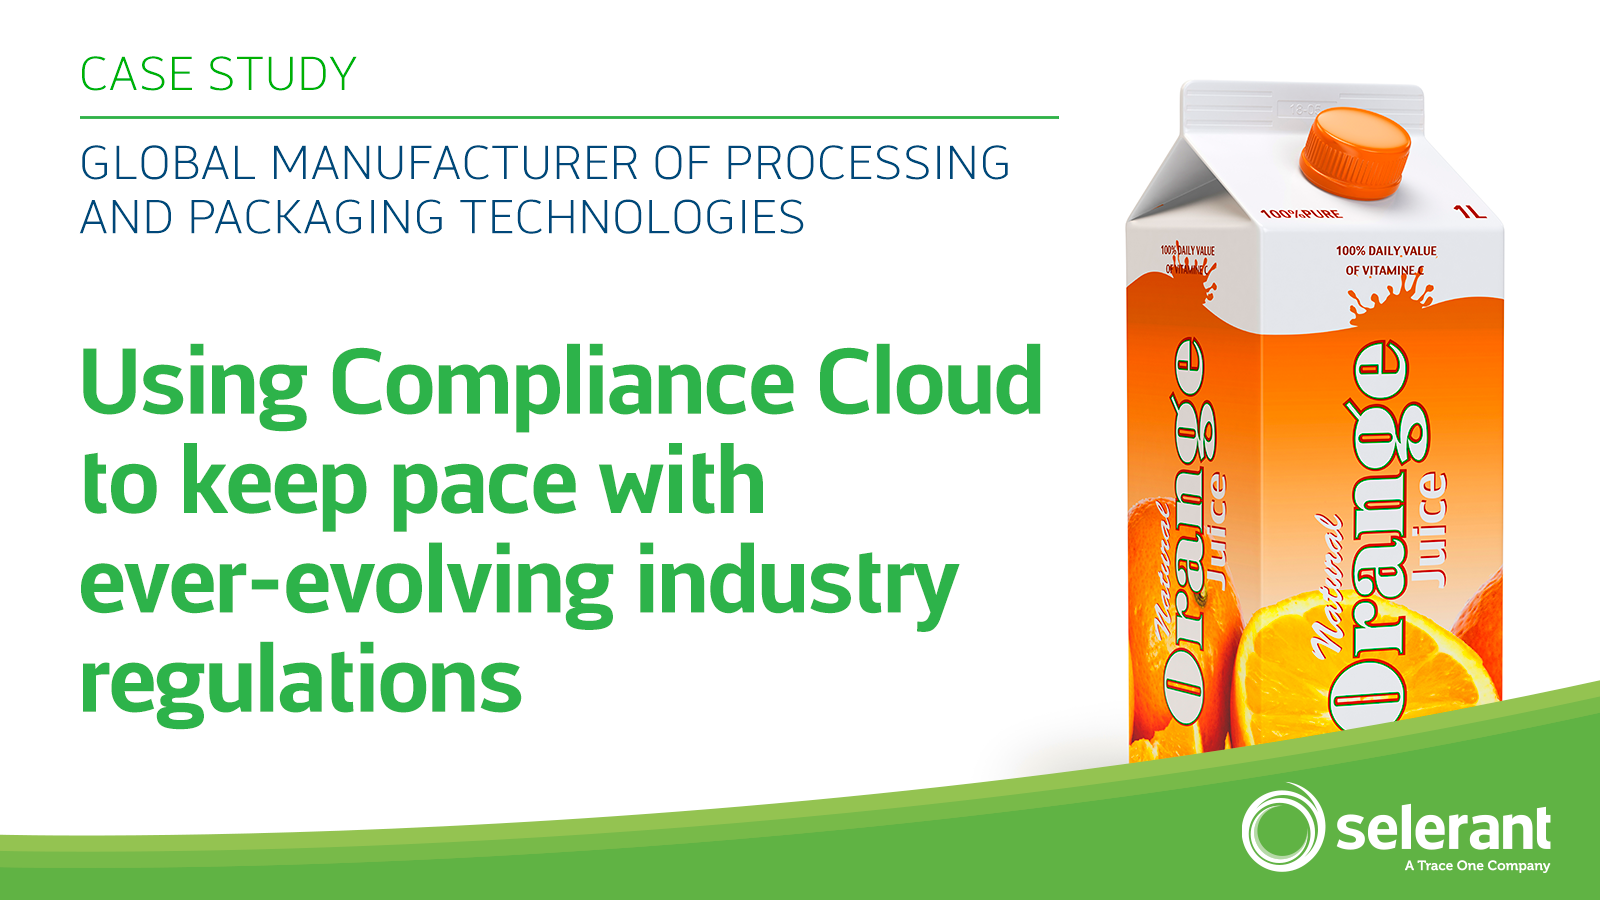 Compliance cloud liquid food processing and packaging leader case study feature image with orange juice carton